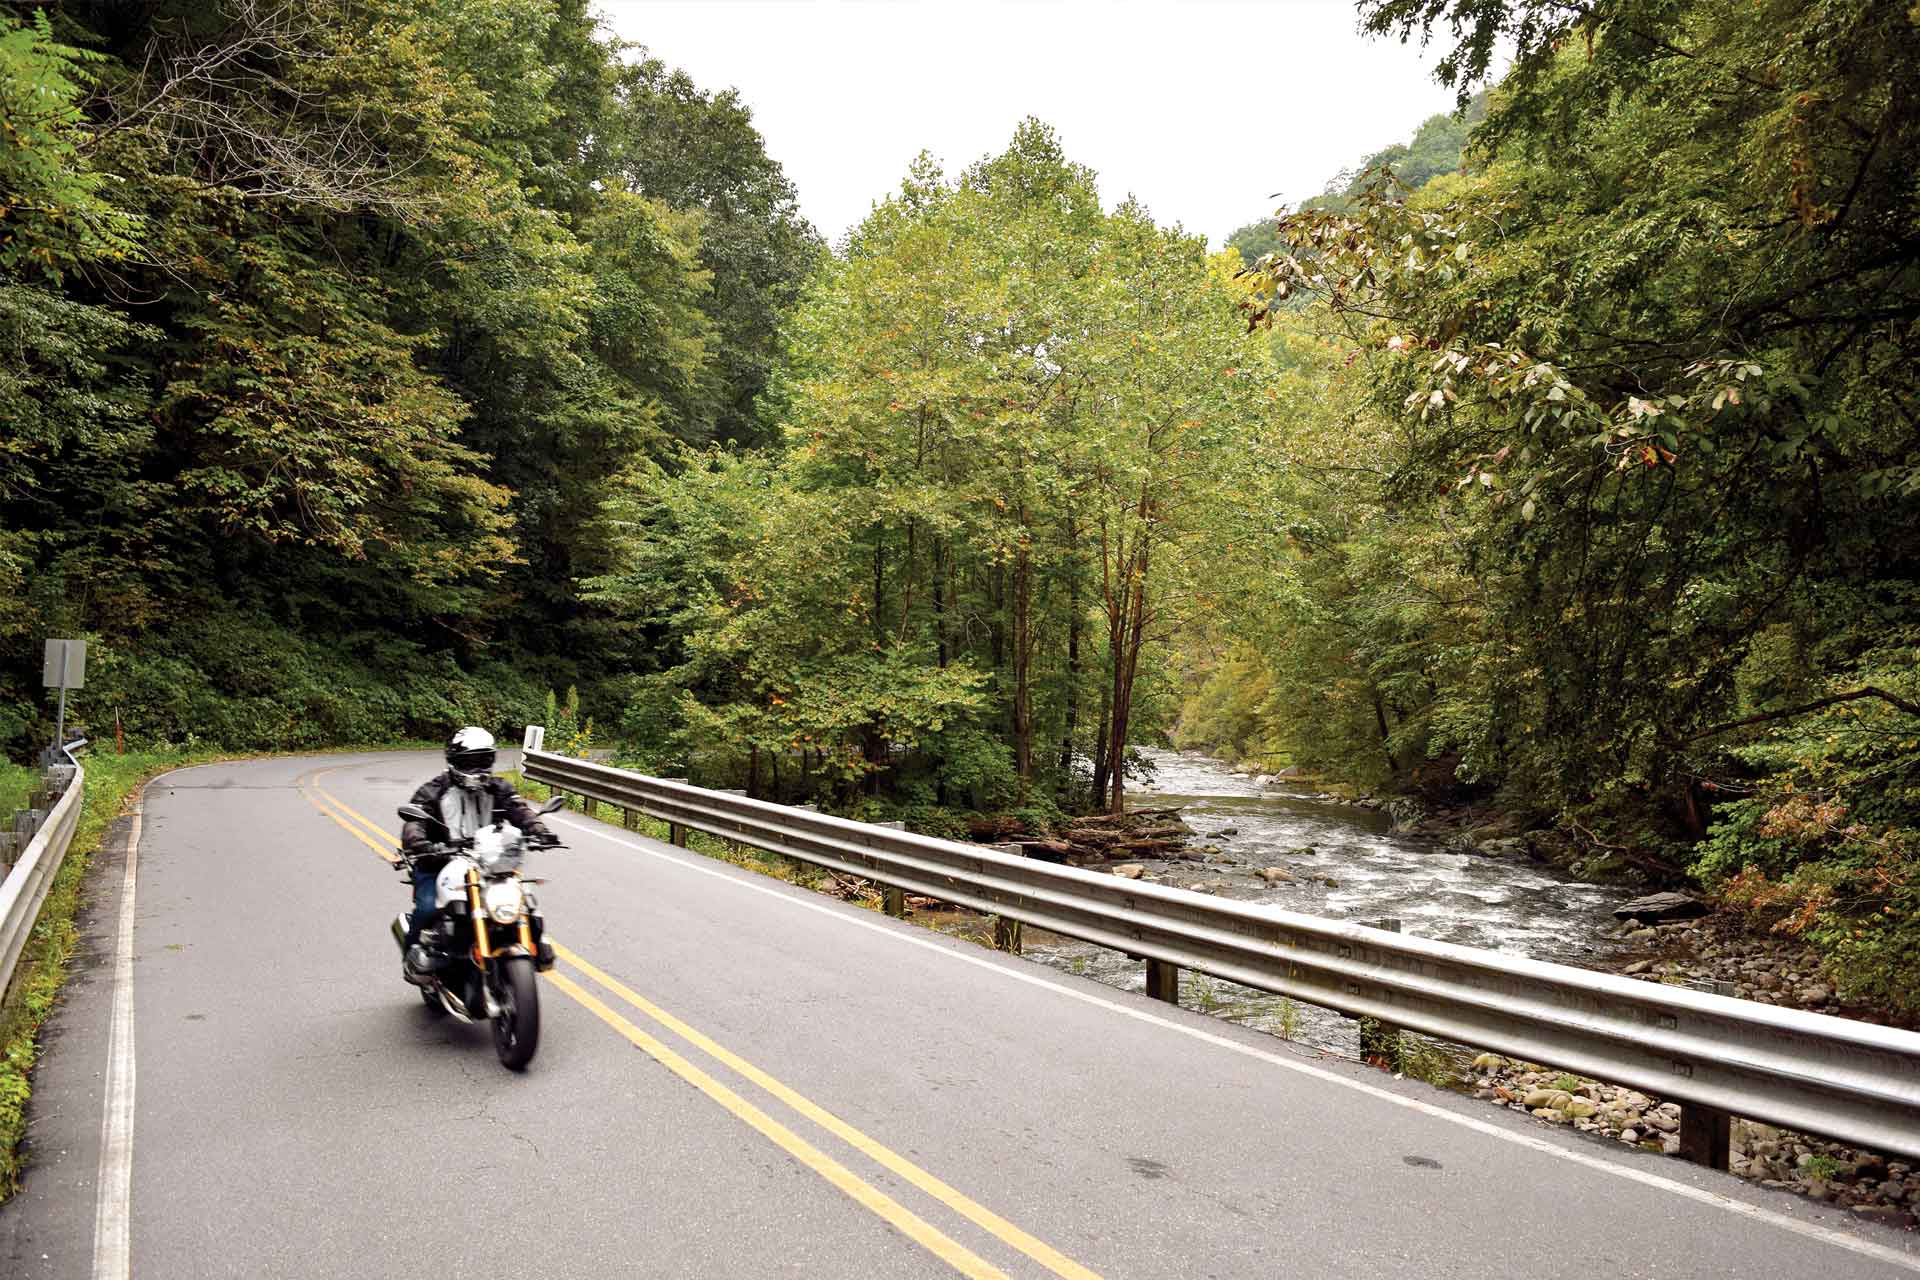 A rider takes the backroad alongside a creek.